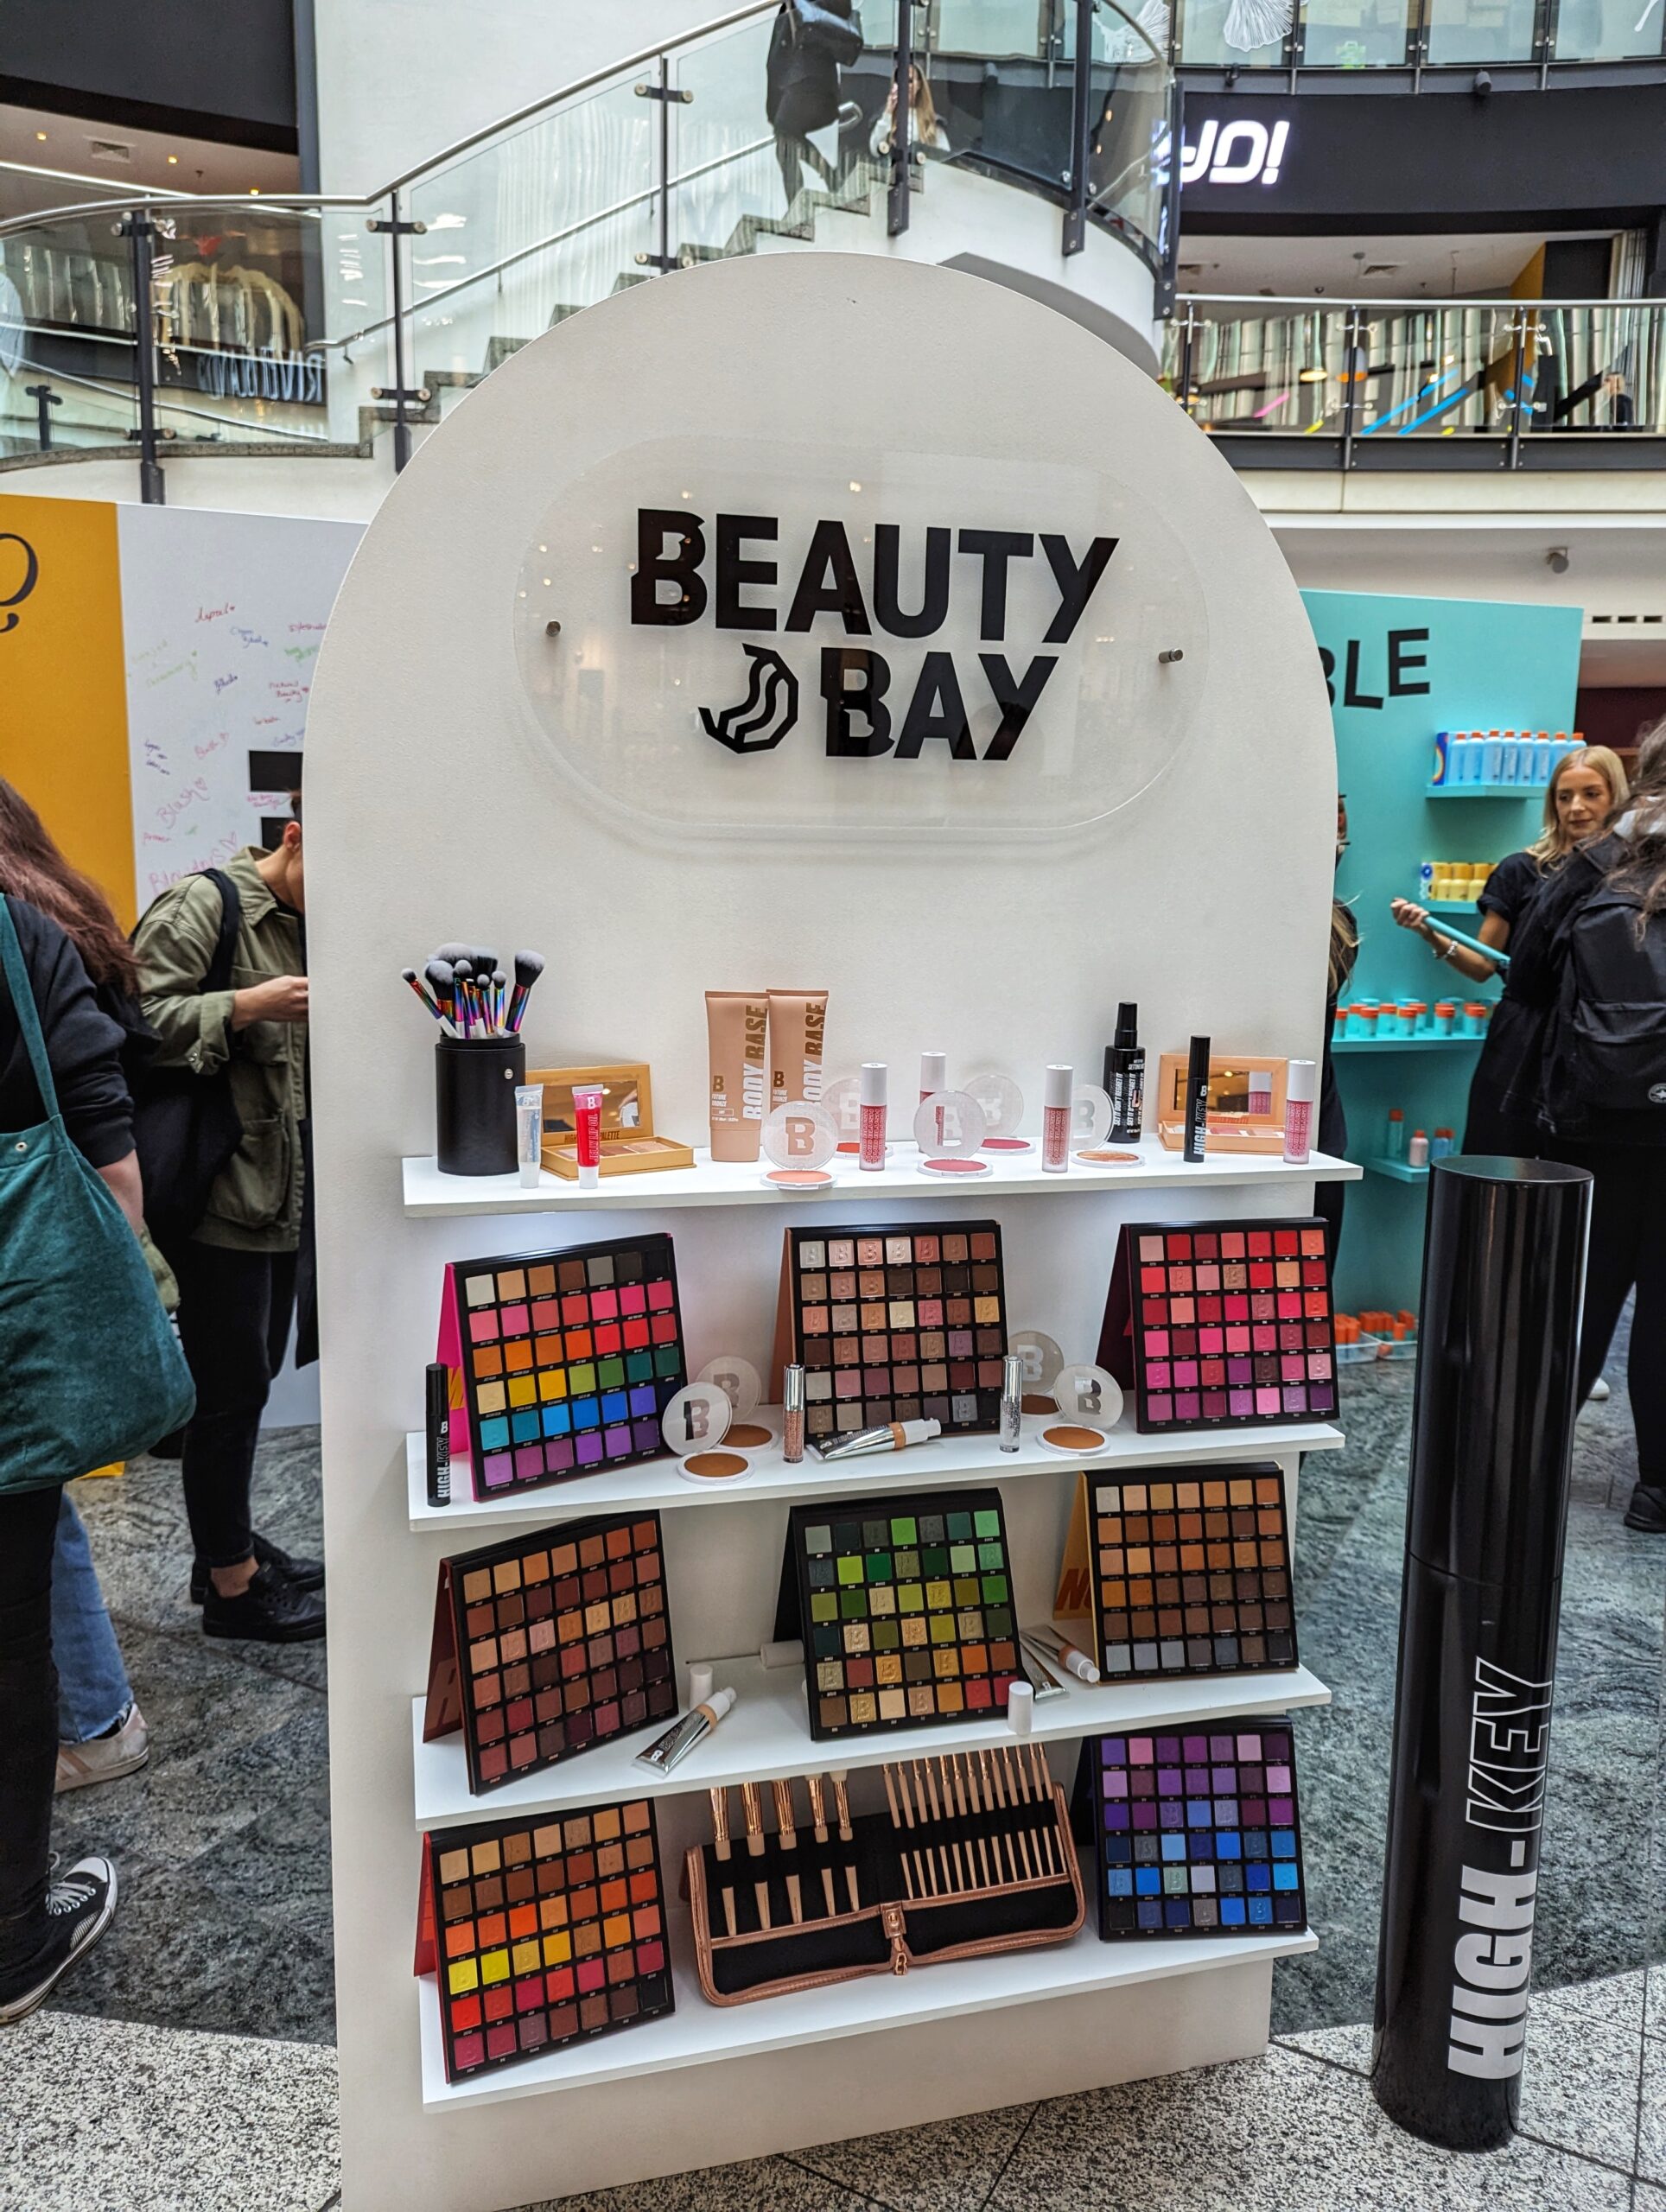 Brands include their own make-up range By Beauty Bay